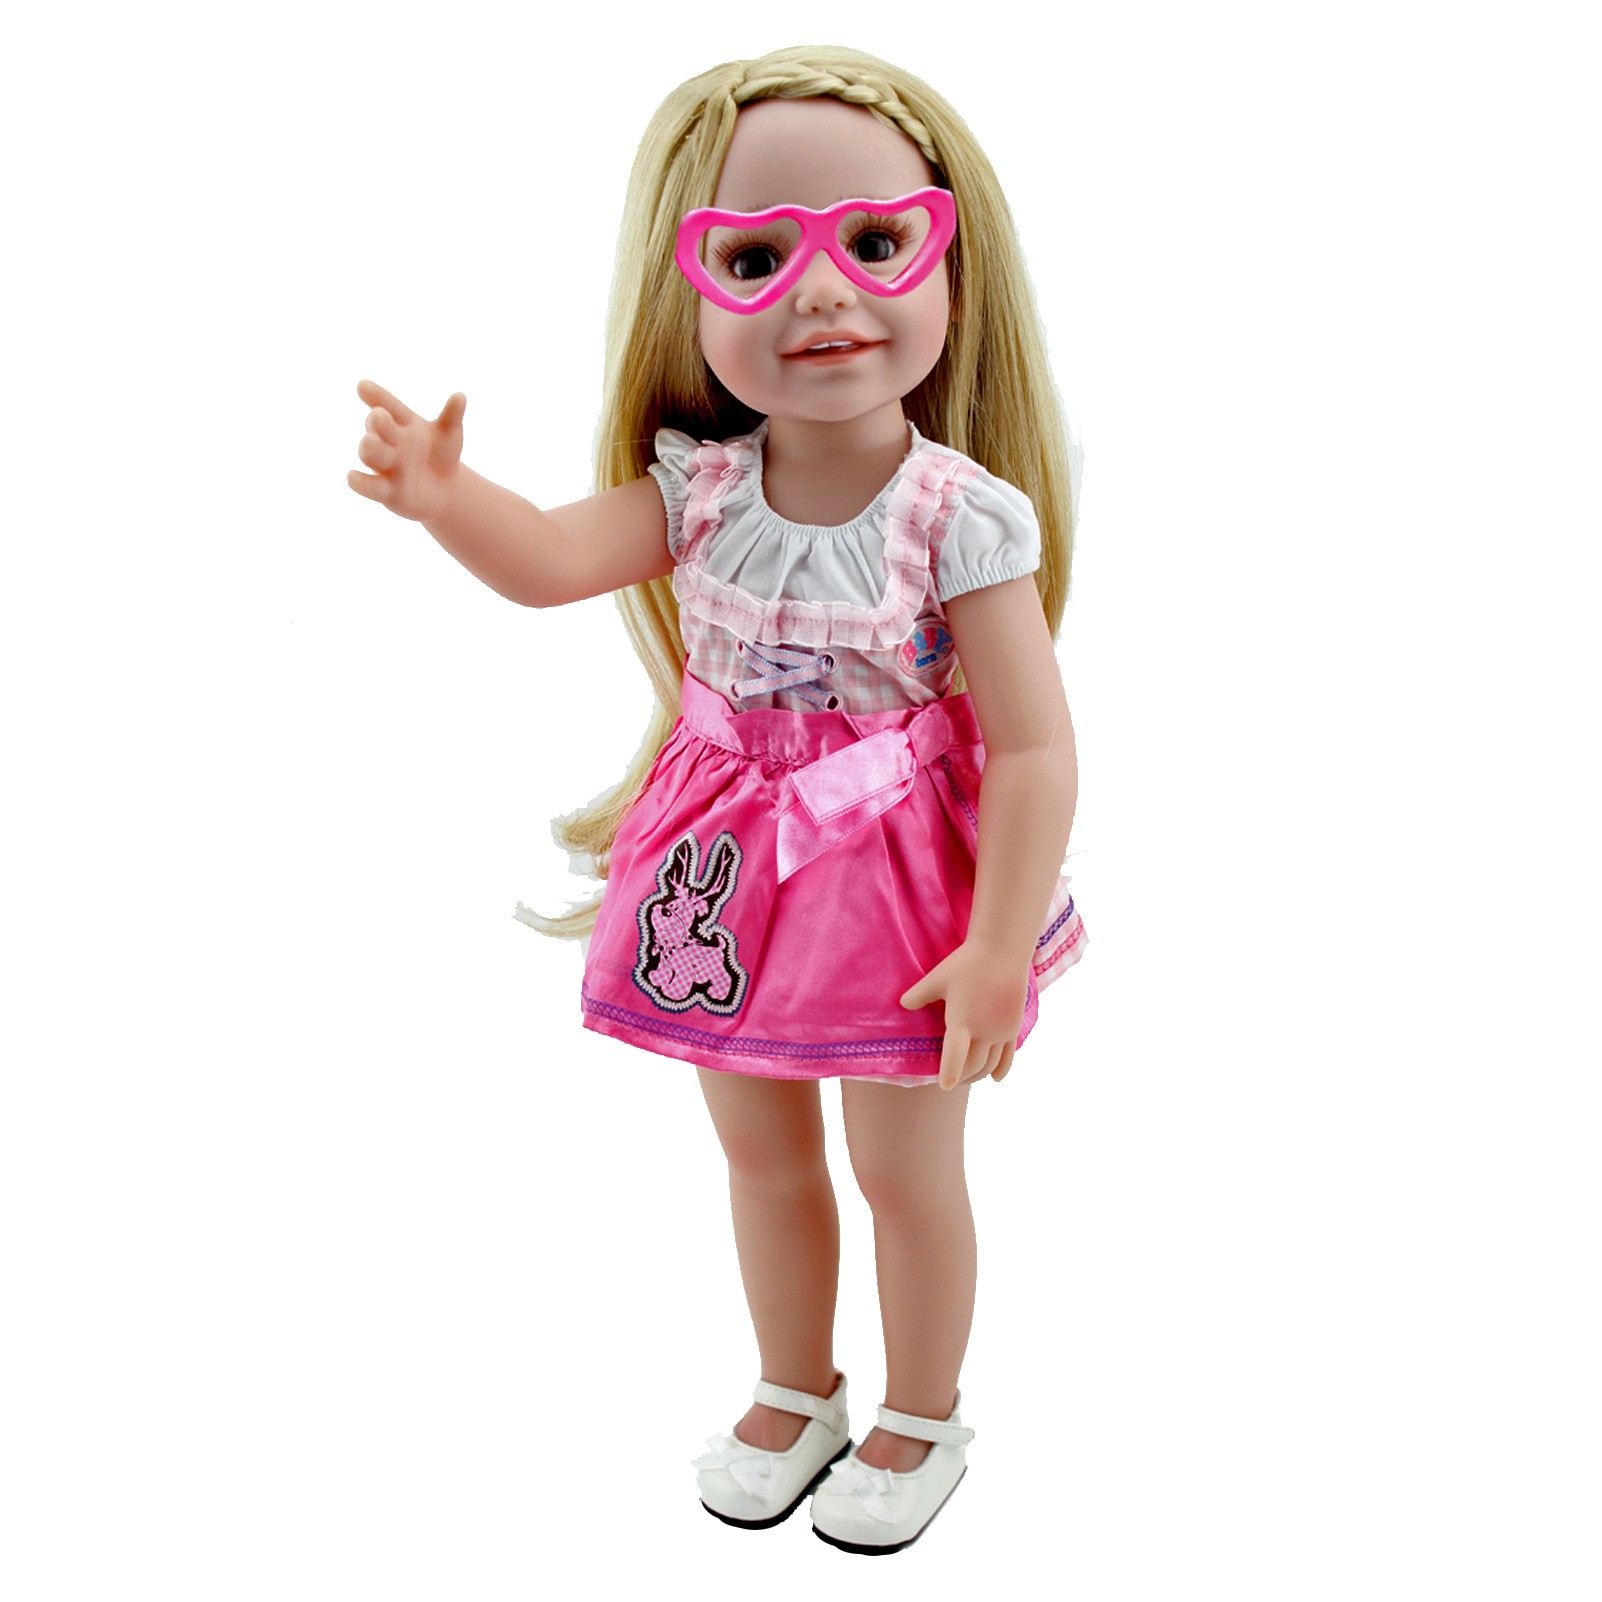 1 Dolls Sunglasses 18" Our Generation American Doll Blue Pink White Orange Heart